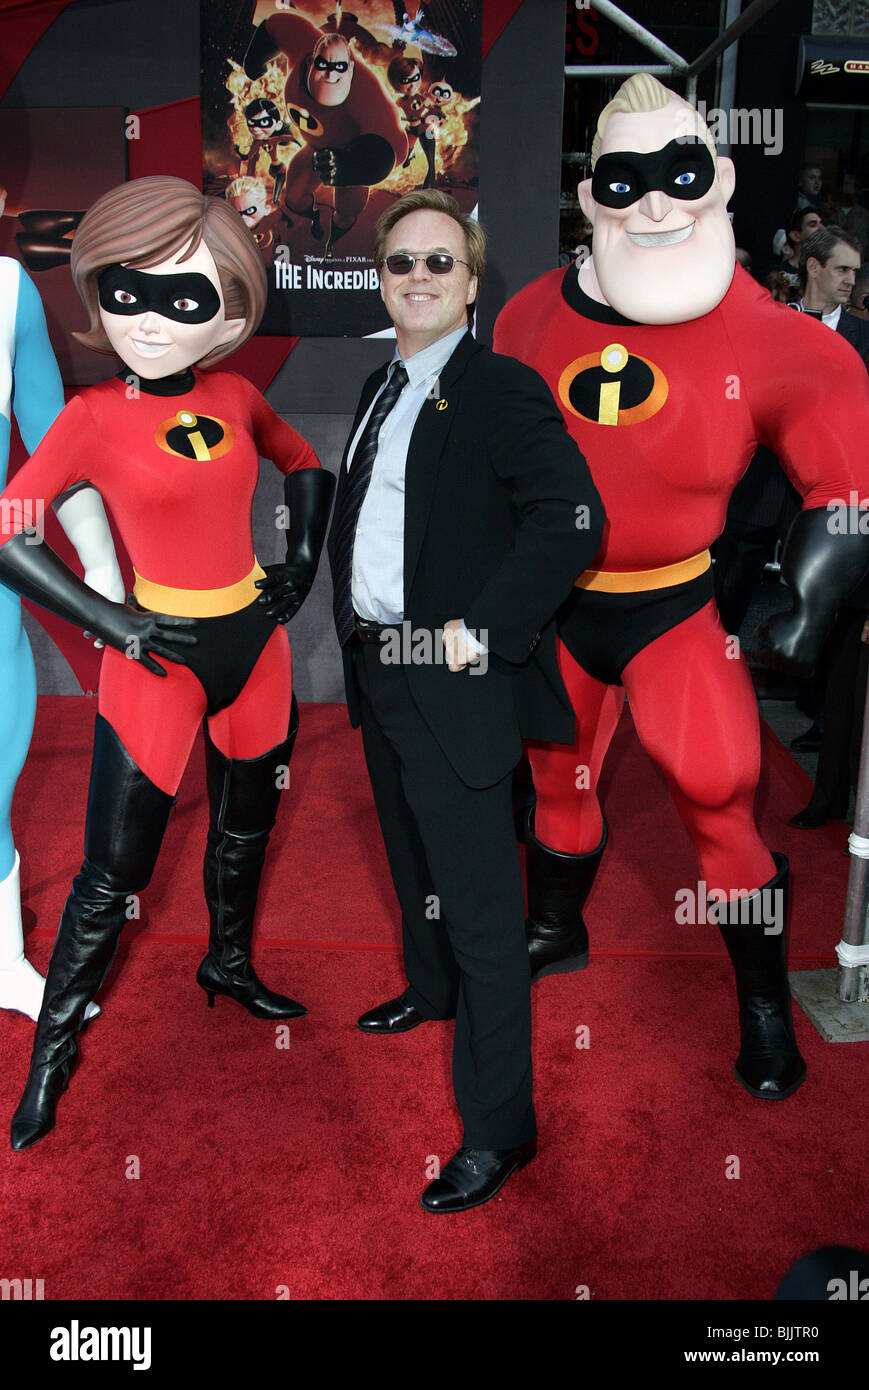 BRAD BIRD & THE INCREDIBLES THE INCREDIBLES WORLD PREMIER HOLLYWOOD LOS ANGELES USA 24 October 2004 Stock Photo